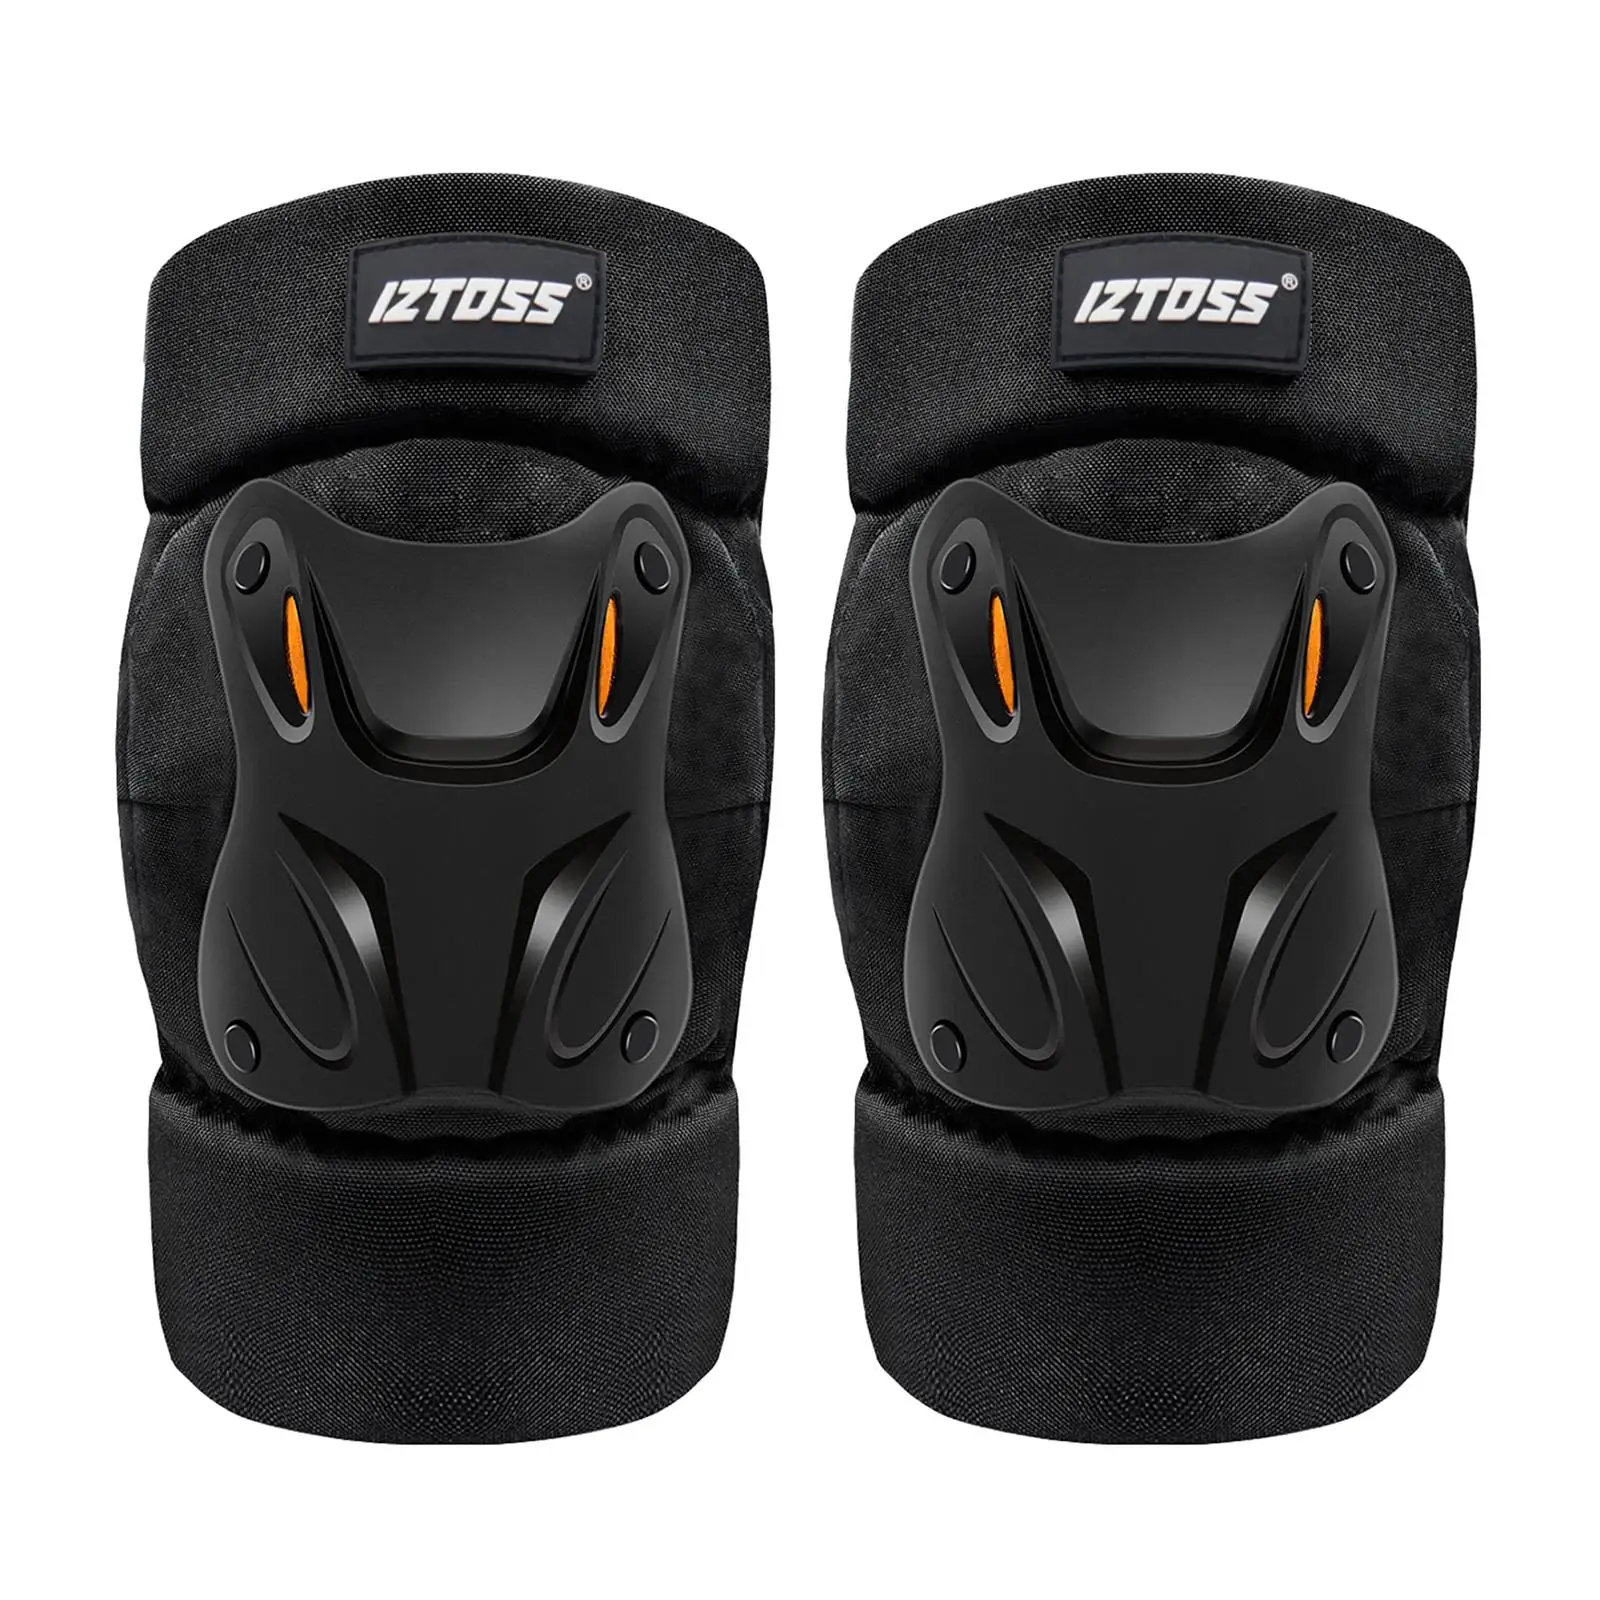 2x Motocross Knee Guard Protector Elbow Pads Breathable Motorcycle Knee Pad for Mountain Biking Balance Bike Scooter Riding